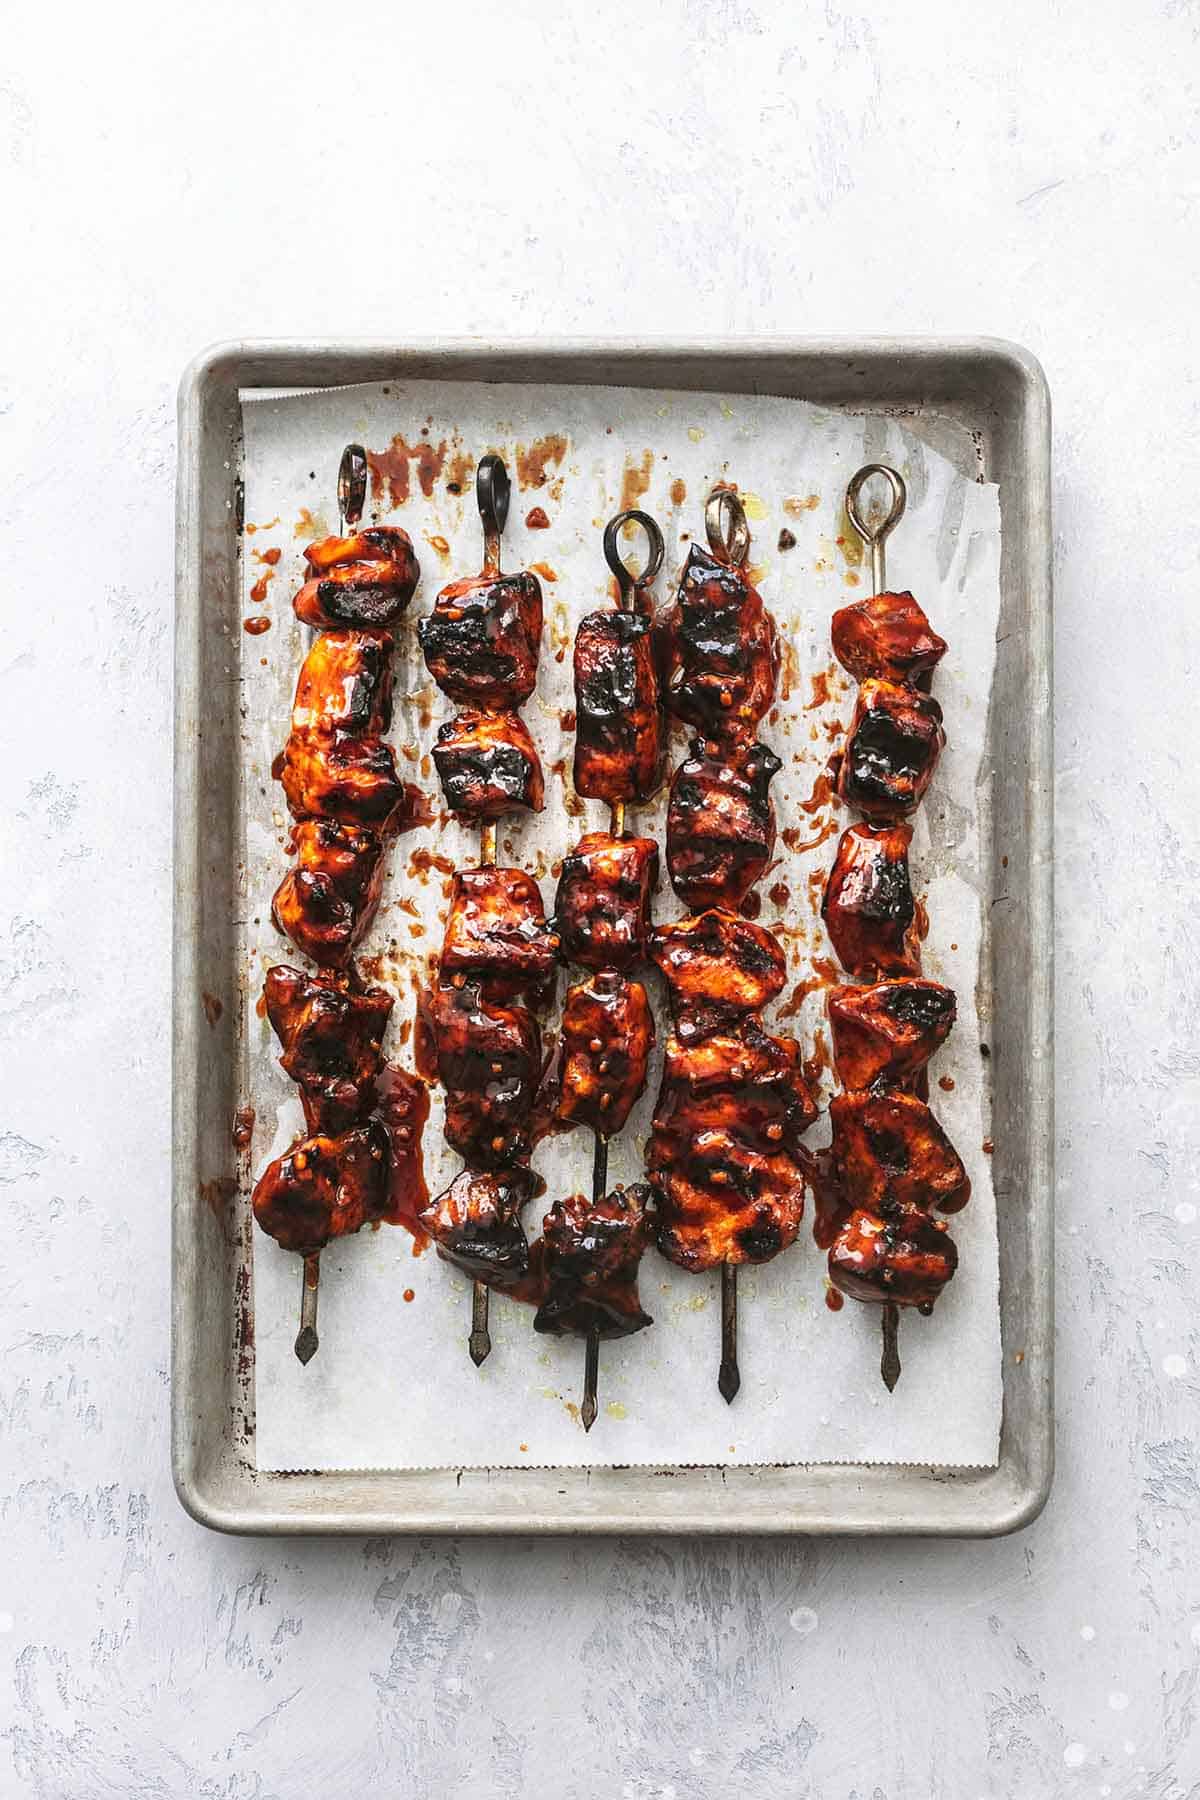 top view of Korean bbq chicken on skewers on a baking sheet.